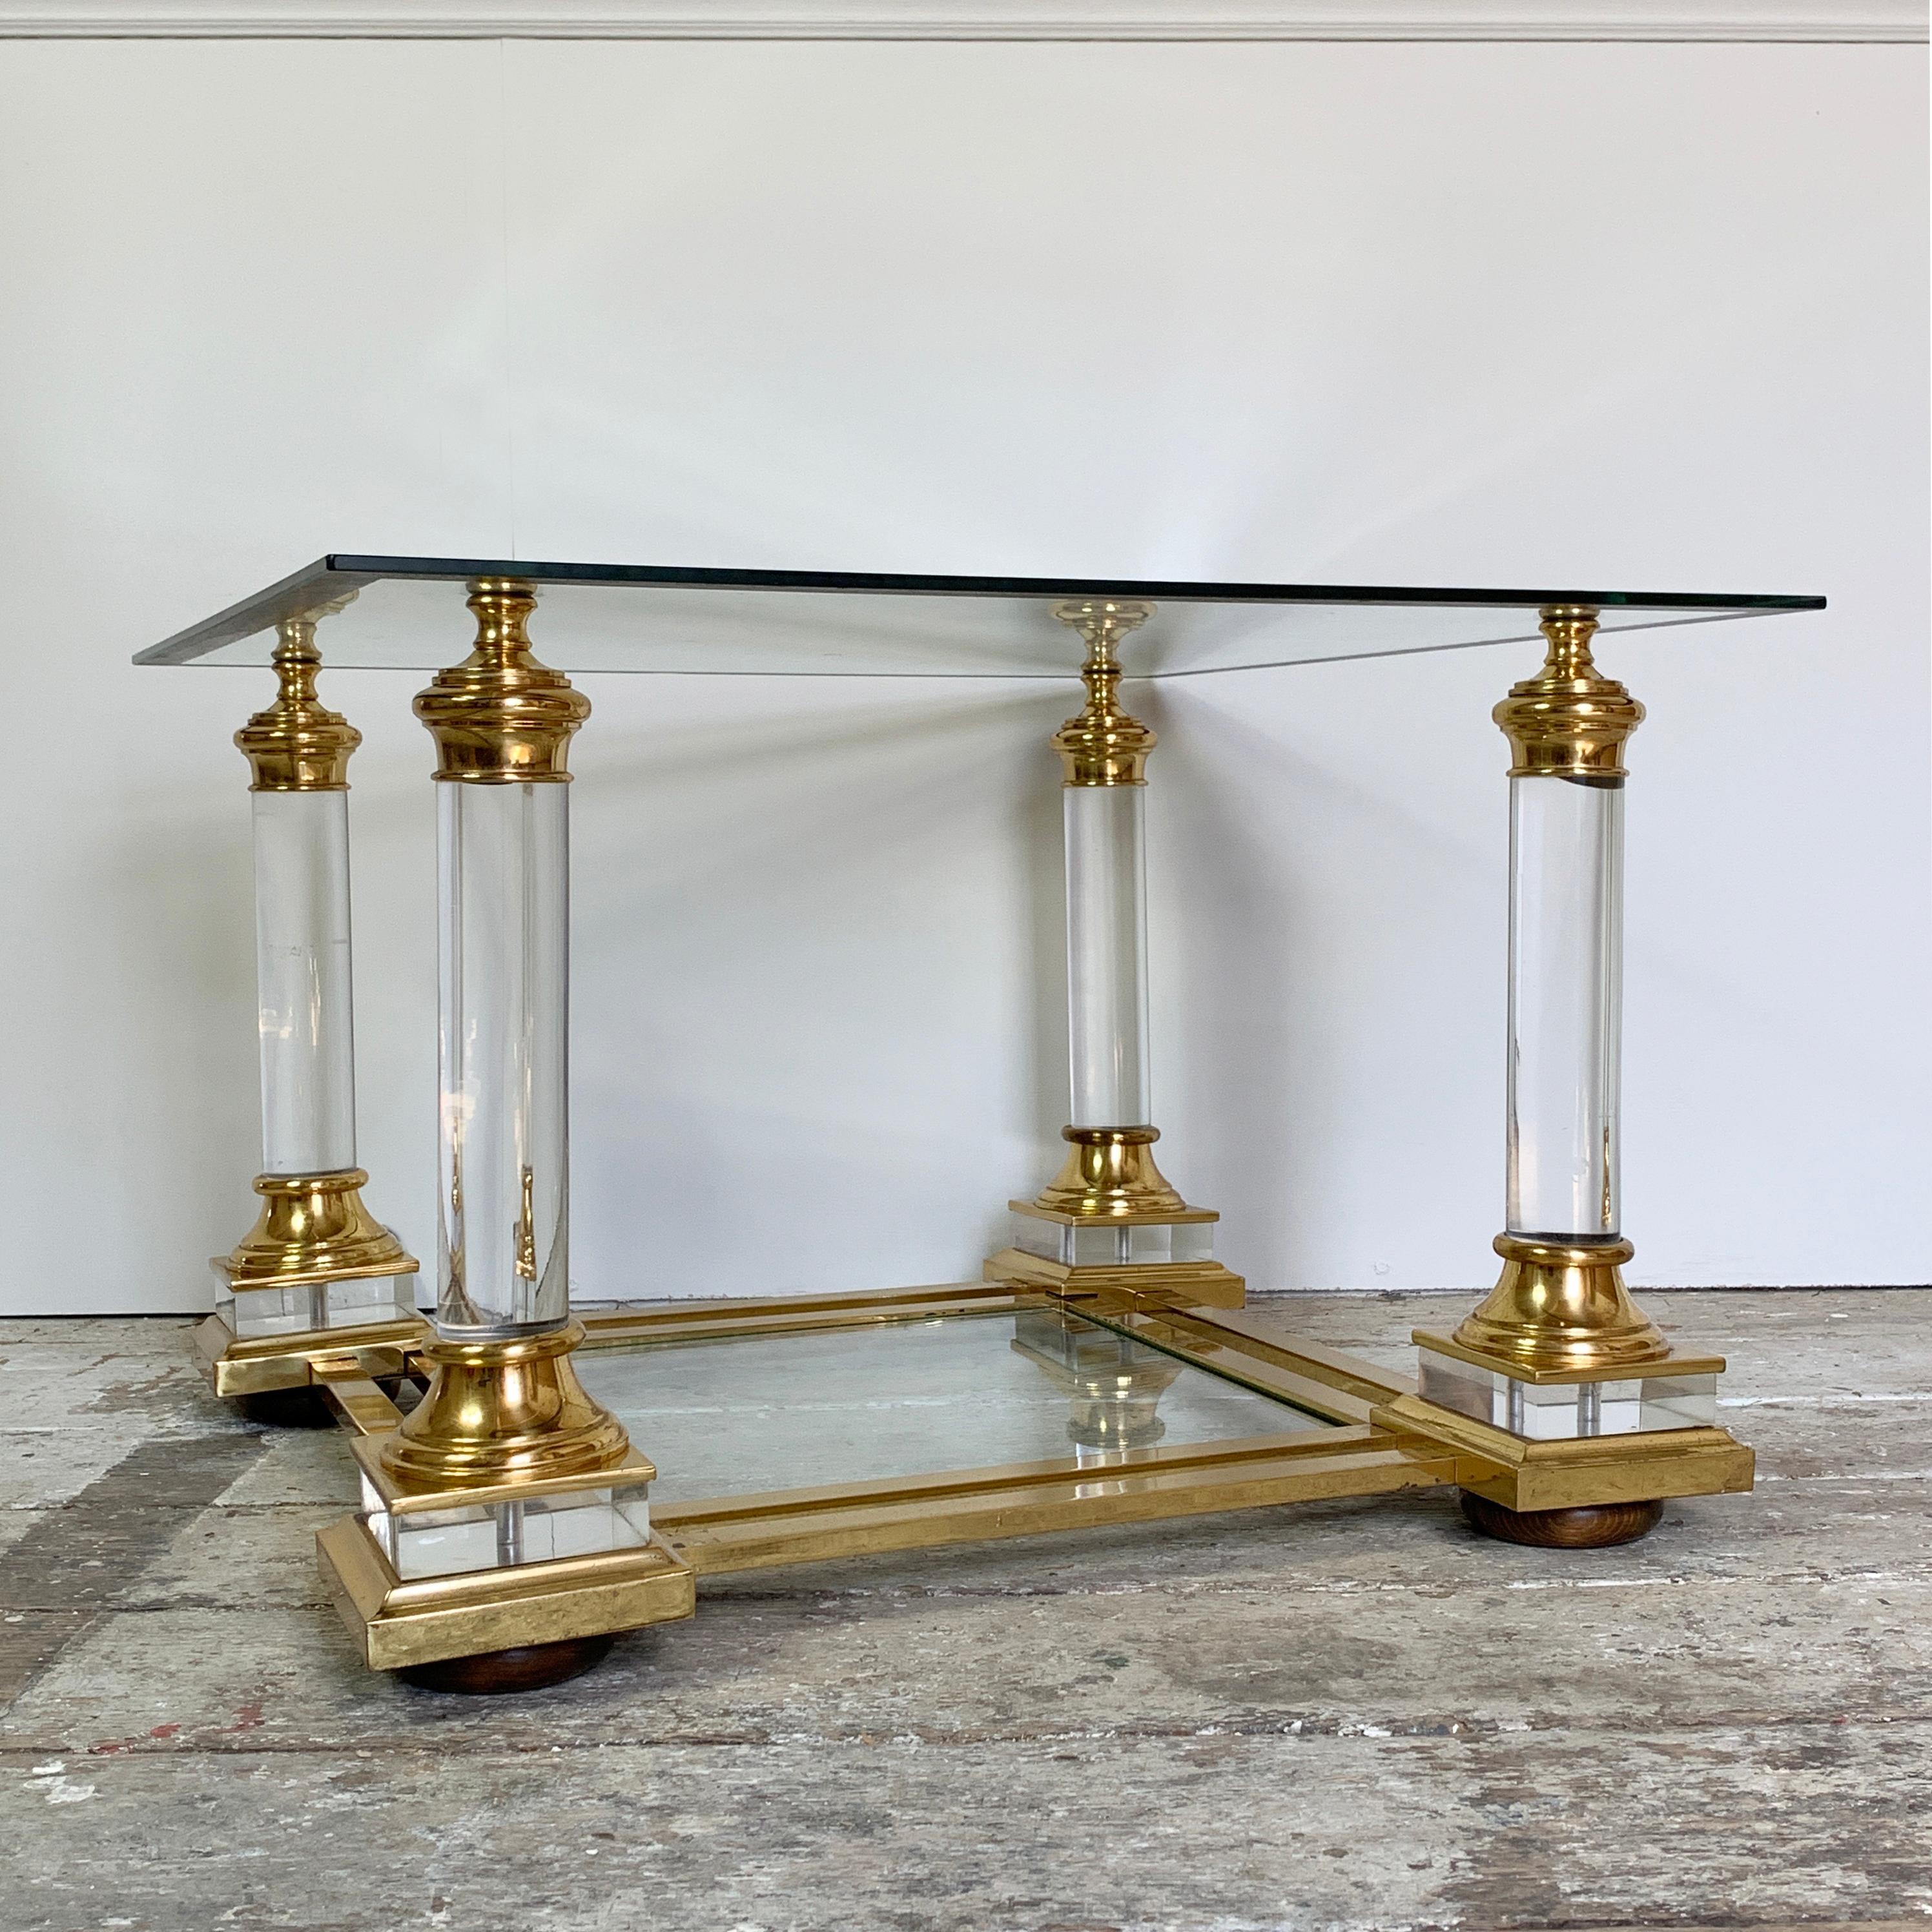 Midcentury Lucite and glass coffee table
Maison Charles,
circa 1950s
Lucite columns on each corner supporting a mirror banded edge, clear glass top
underneath a double banded brass frame supports a further clear glass shelf
some tarnishing to